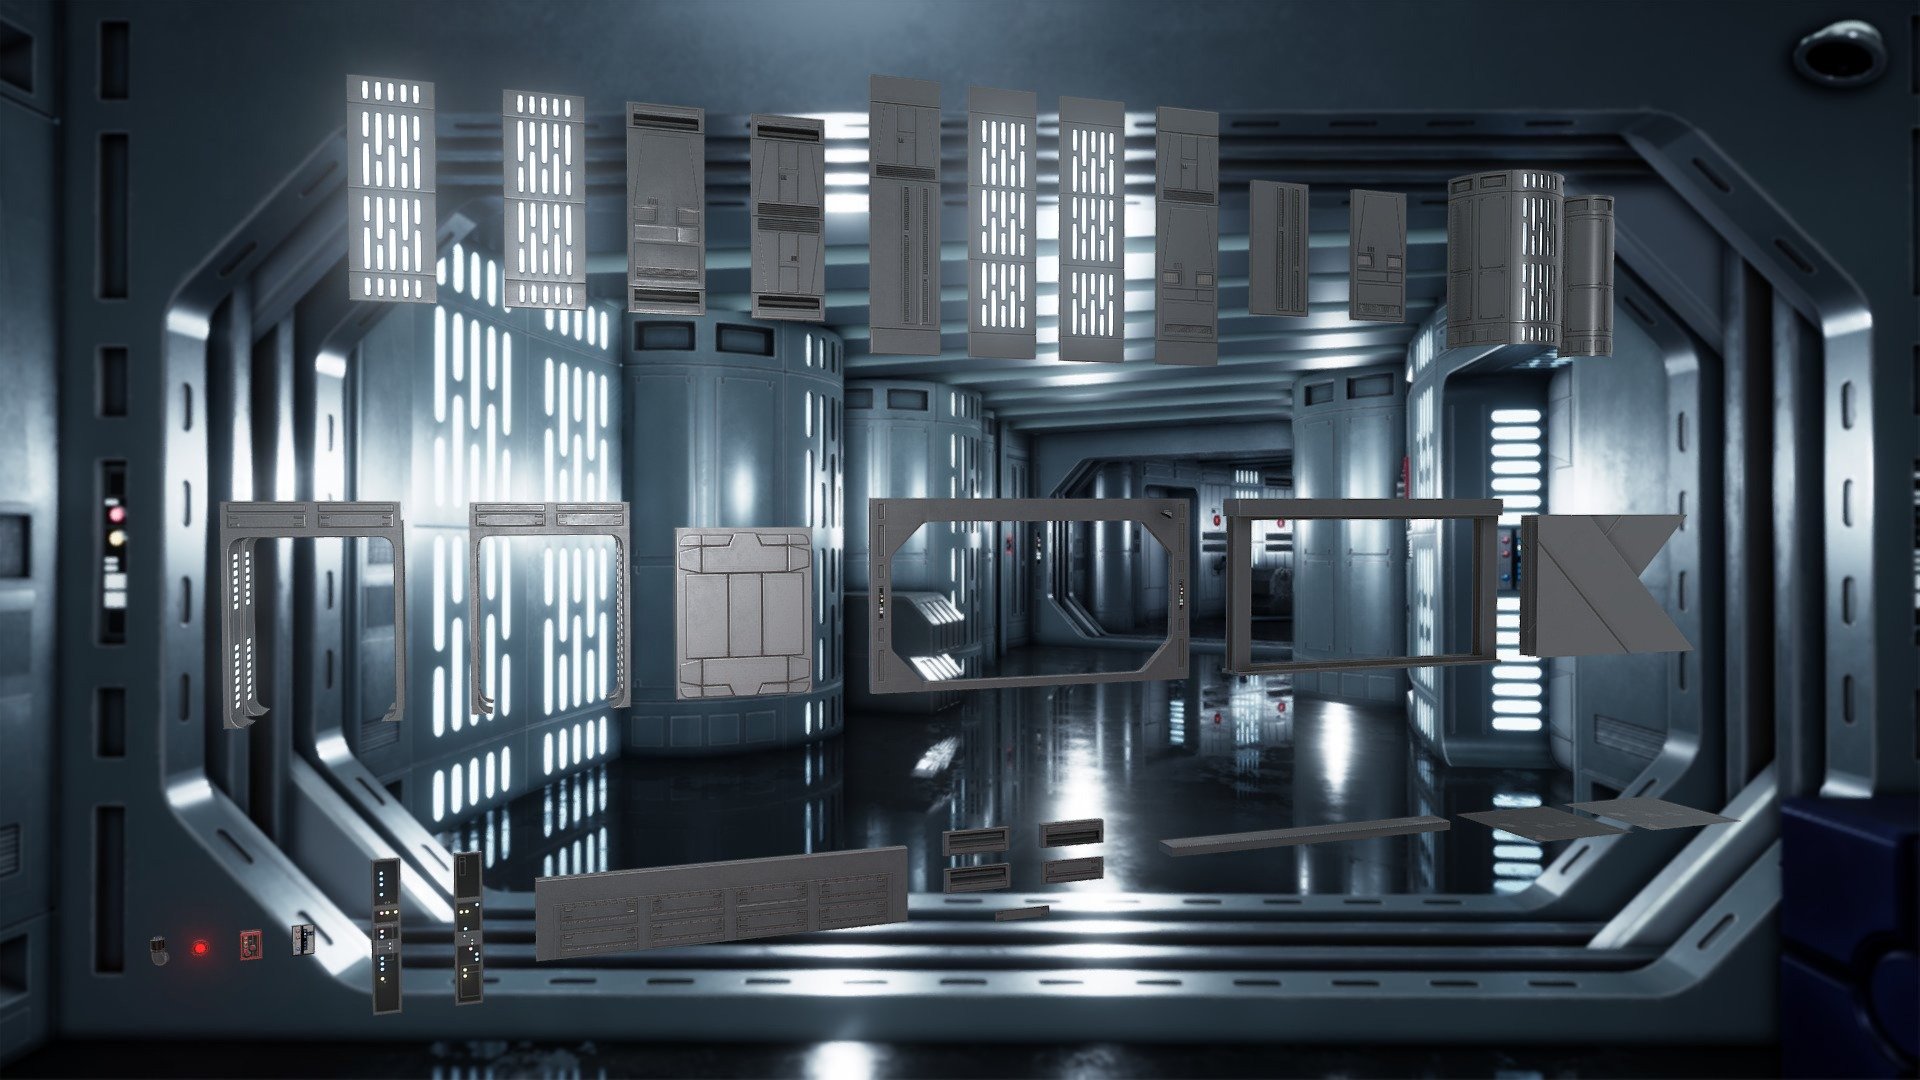 First set of modular assets to create a Death Star like interior environment.

Walls are set to a 10 grid vertically and depth wise, a 5 grid horizontally.   Doorways differ and had to be set to a 5 grid depth wise to keep the right thickness. 

Pivot point is on the front corner where possible.

Display textures on Sketchfab are 2048 and 1024, on download I have made them all 4096 apart from the Emissives that are 1024 in a zip folder with the models all seperate and named accordingly as well. 

Some models use the same texture so these will be packed together in folders.

For the floor textures I have added a diffuse, metal and rough. But in Unreal Engine the diffuse can just be R 0.0104 G 0.0104 B 0.0104  and a metal value of 0.5 with the roughness texture to get the same effect.

BACKGROUND IS AN EXAMPLE OF HOW IT CAN LOOK IN UNREAL ENGINE WITH POST PROCESS - Death Star- Assets- Pack 001 - Buy Royalty Free 3D model by Philip Gilbert (@PhilipAGilbert) 3d model